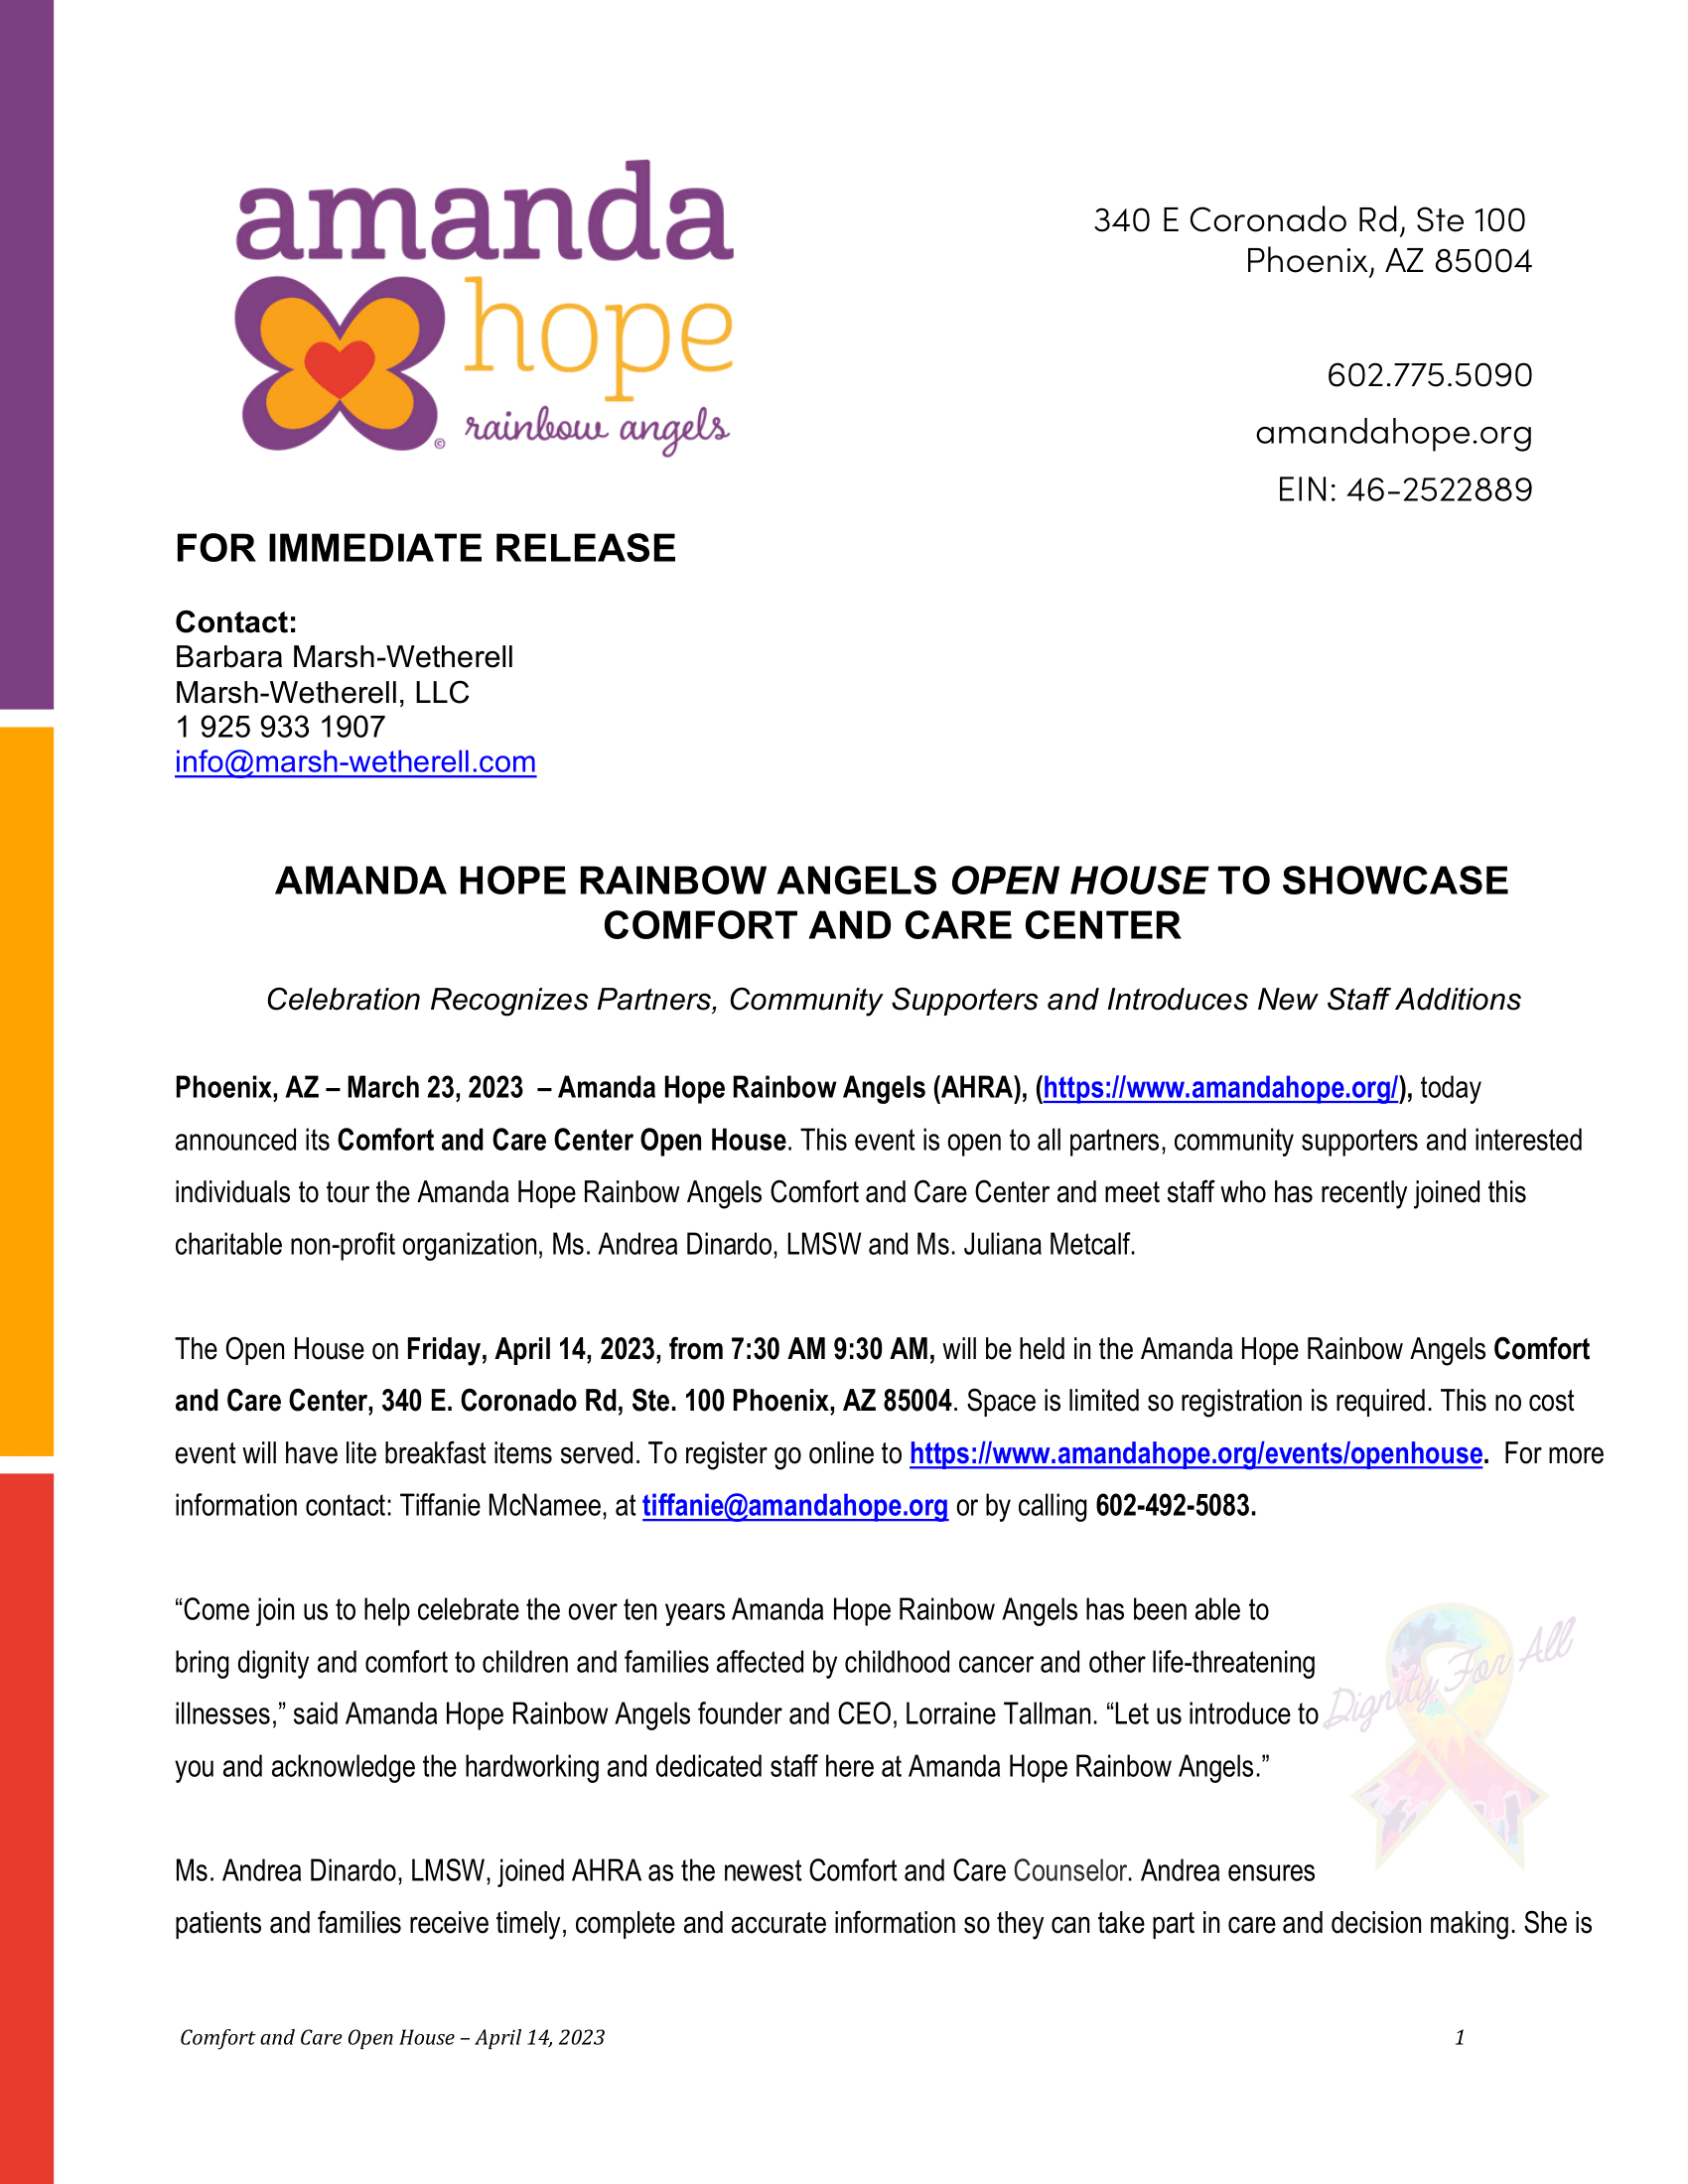 AMANDA HOPE RAINBOW ANGELS OPEN HOUSE TO SHOWCASE  COMFORT AND CARE CENTER